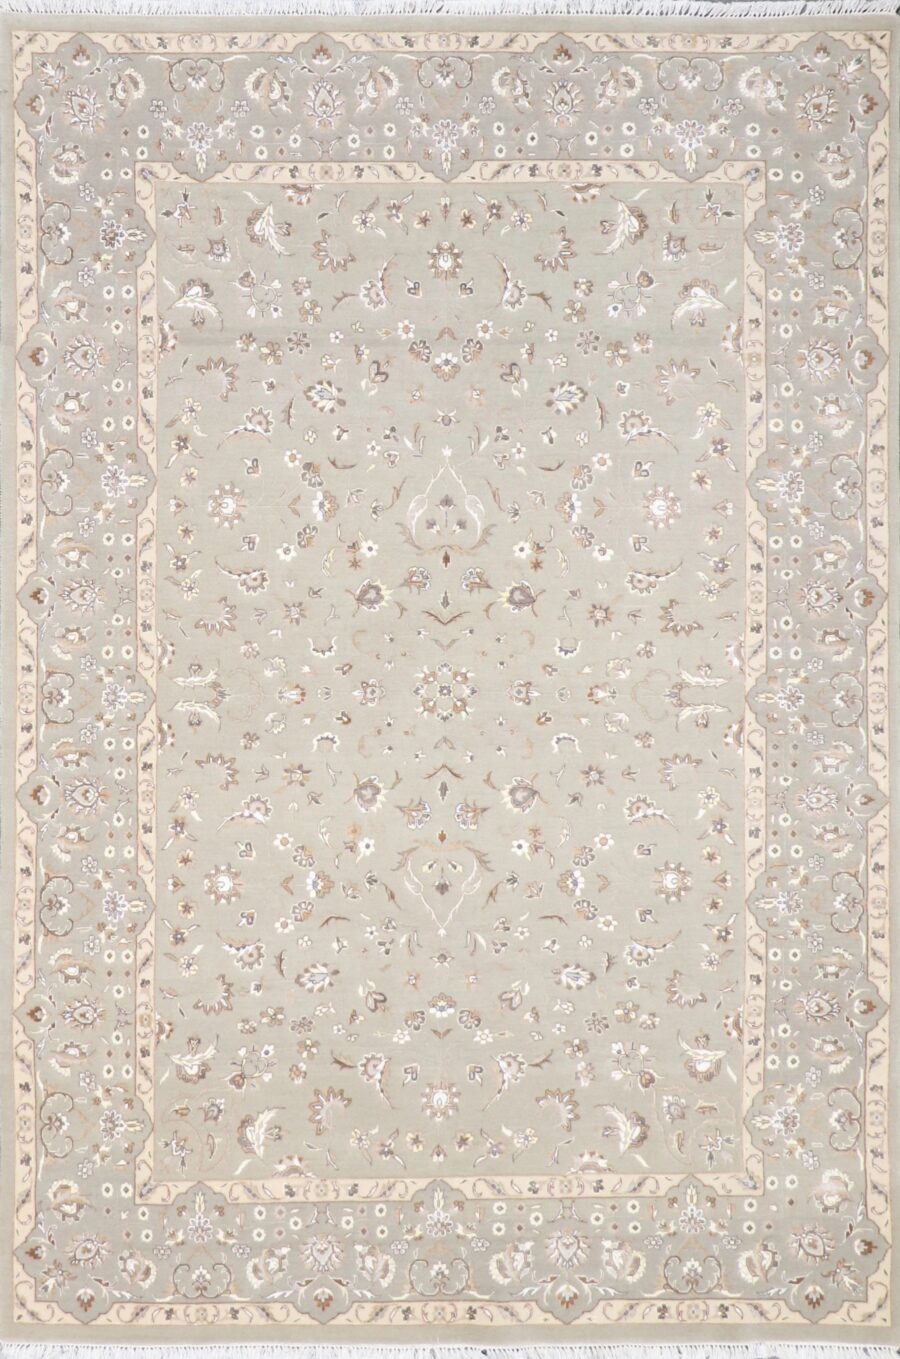 5’4”x7’9” Traditional Gray Wool Hand-Knotted Rug - Direct Rug Import | Rugs in Chicago, Indiana,South Bend,Granger